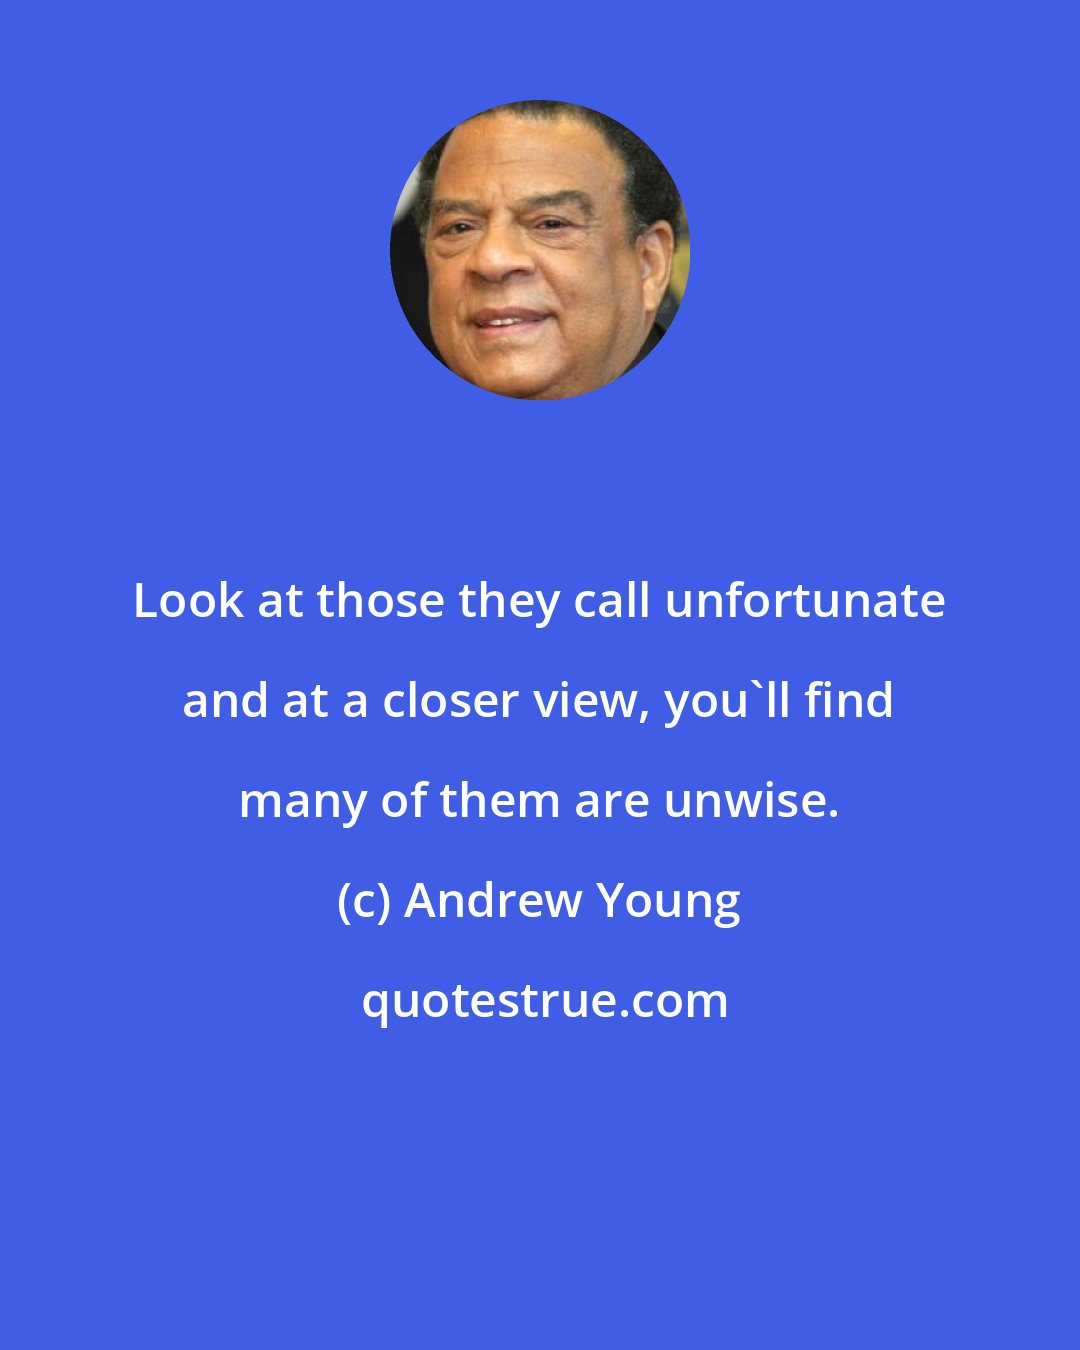 Andrew Young: Look at those they call unfortunate and at a closer view, you'll find many of them are unwise.